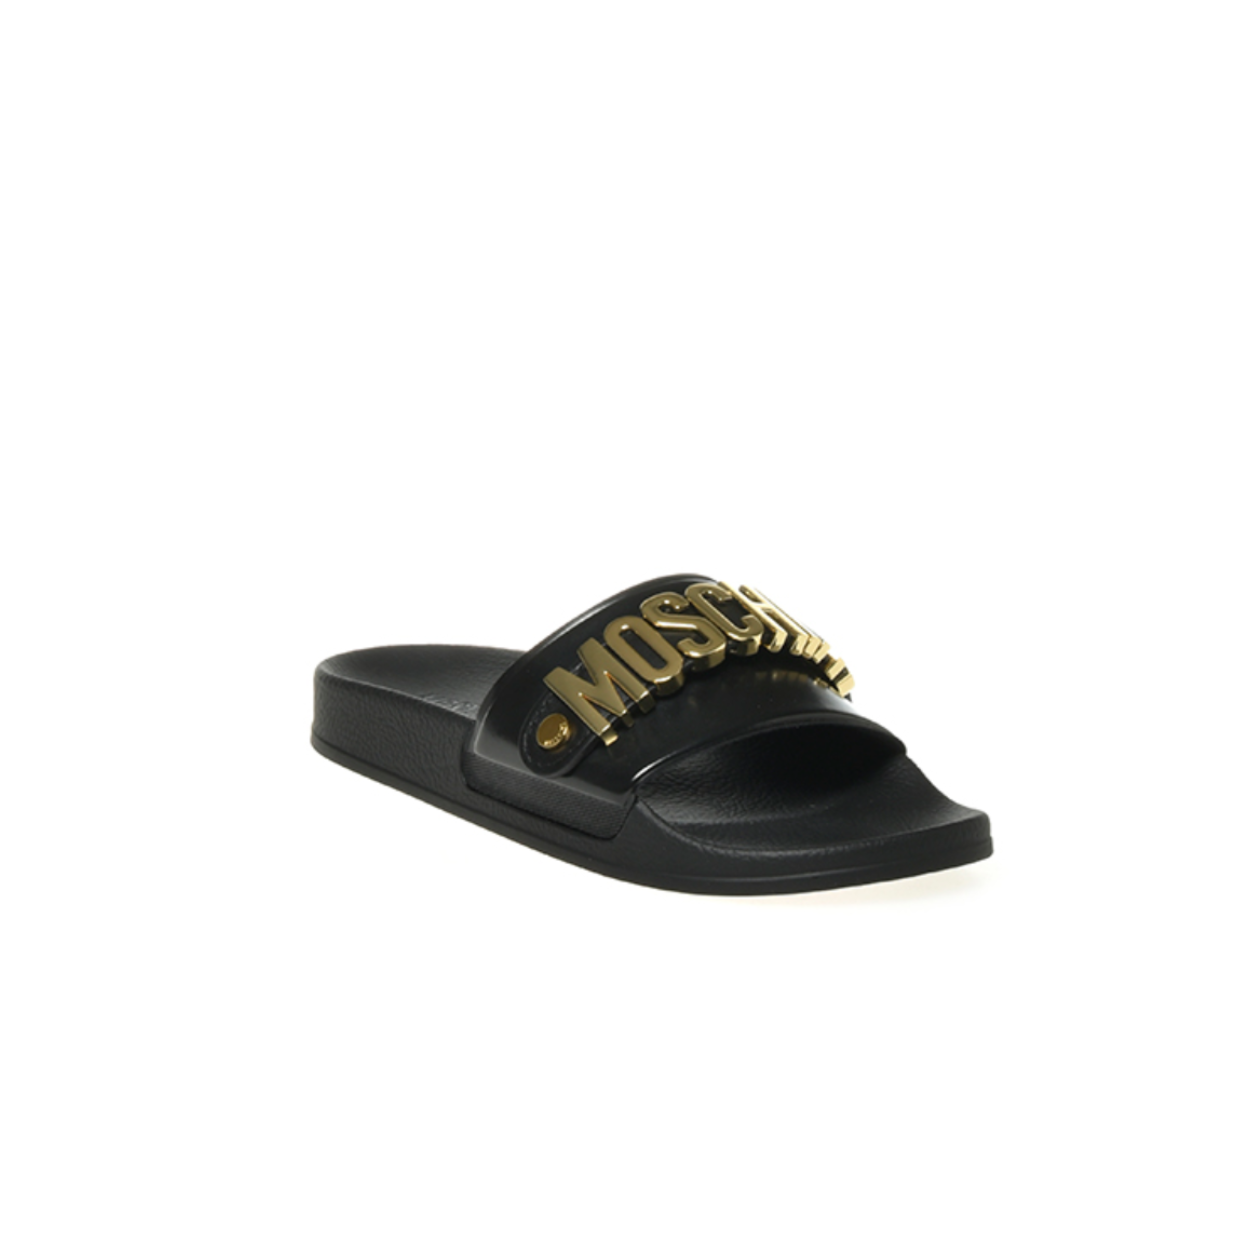 black and gold moschino slides